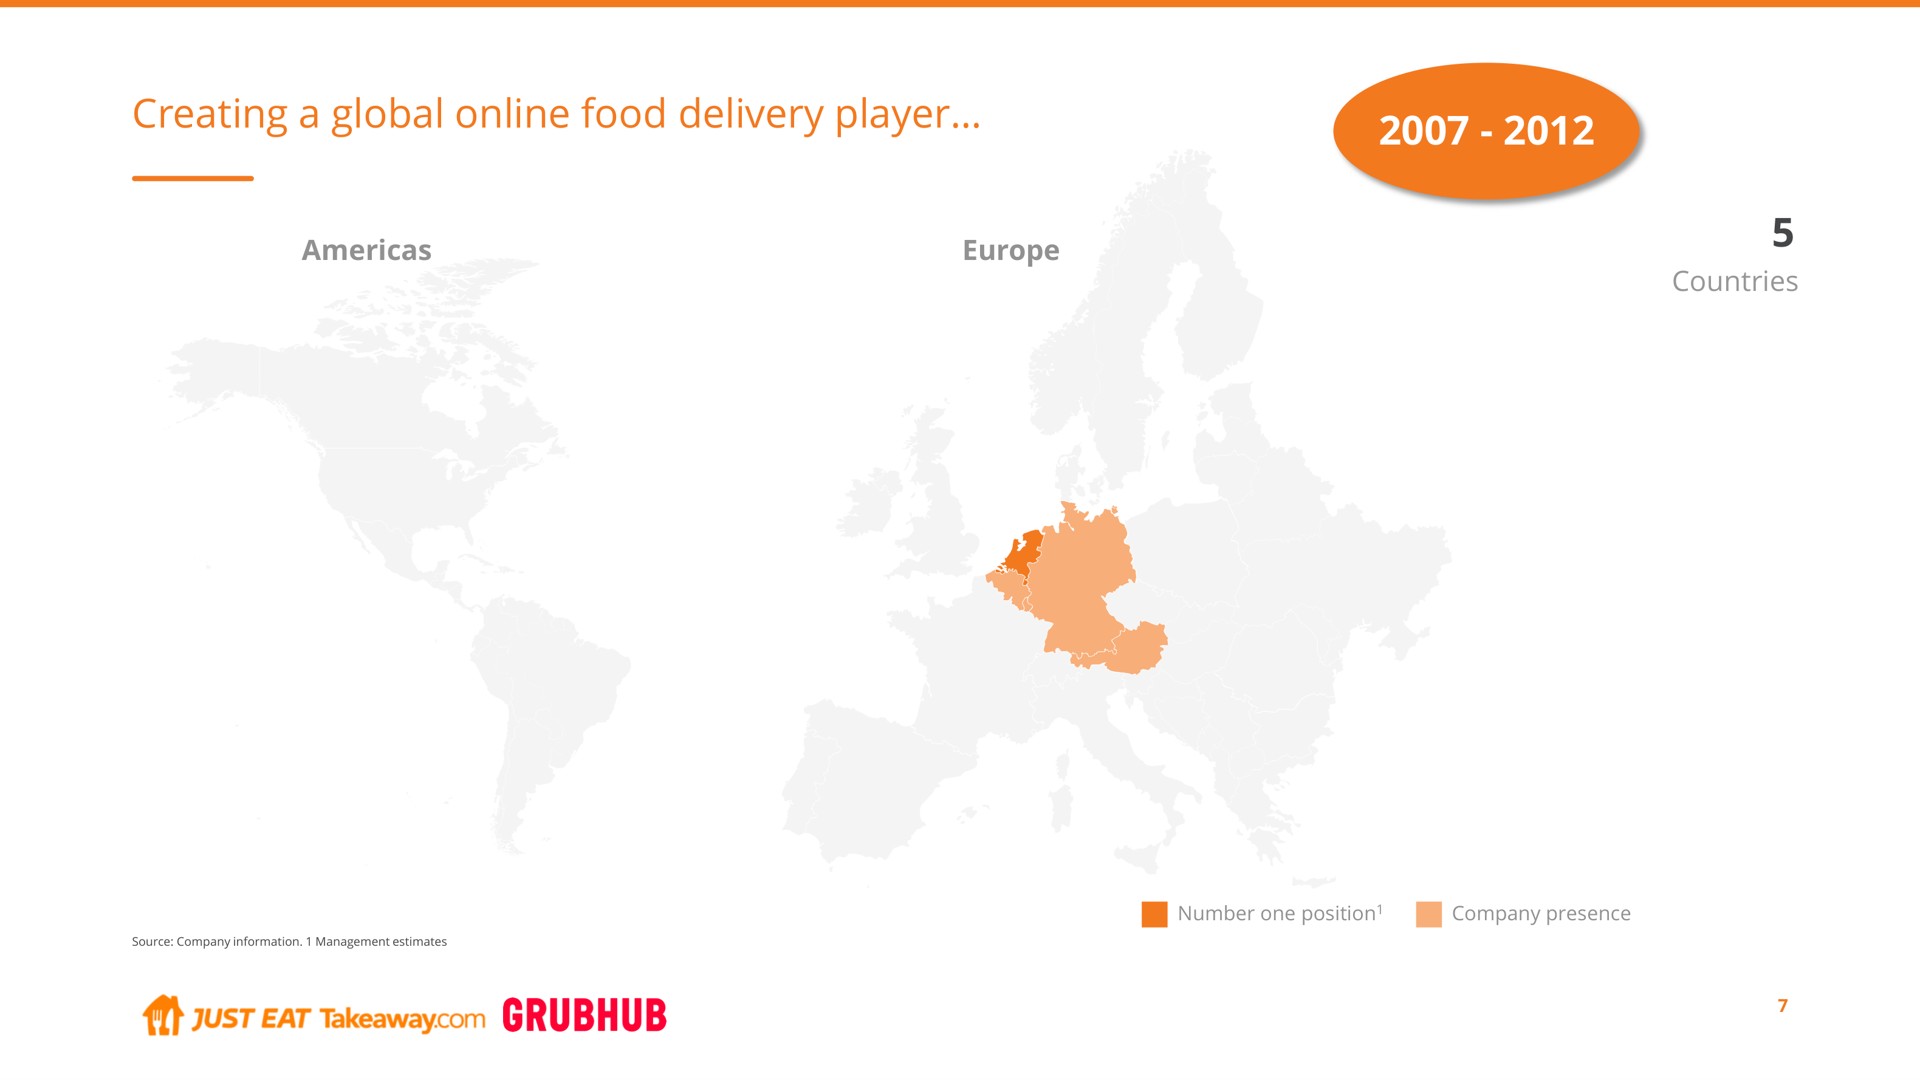 creating a global food delivery player | Just Eat Takeaway.com